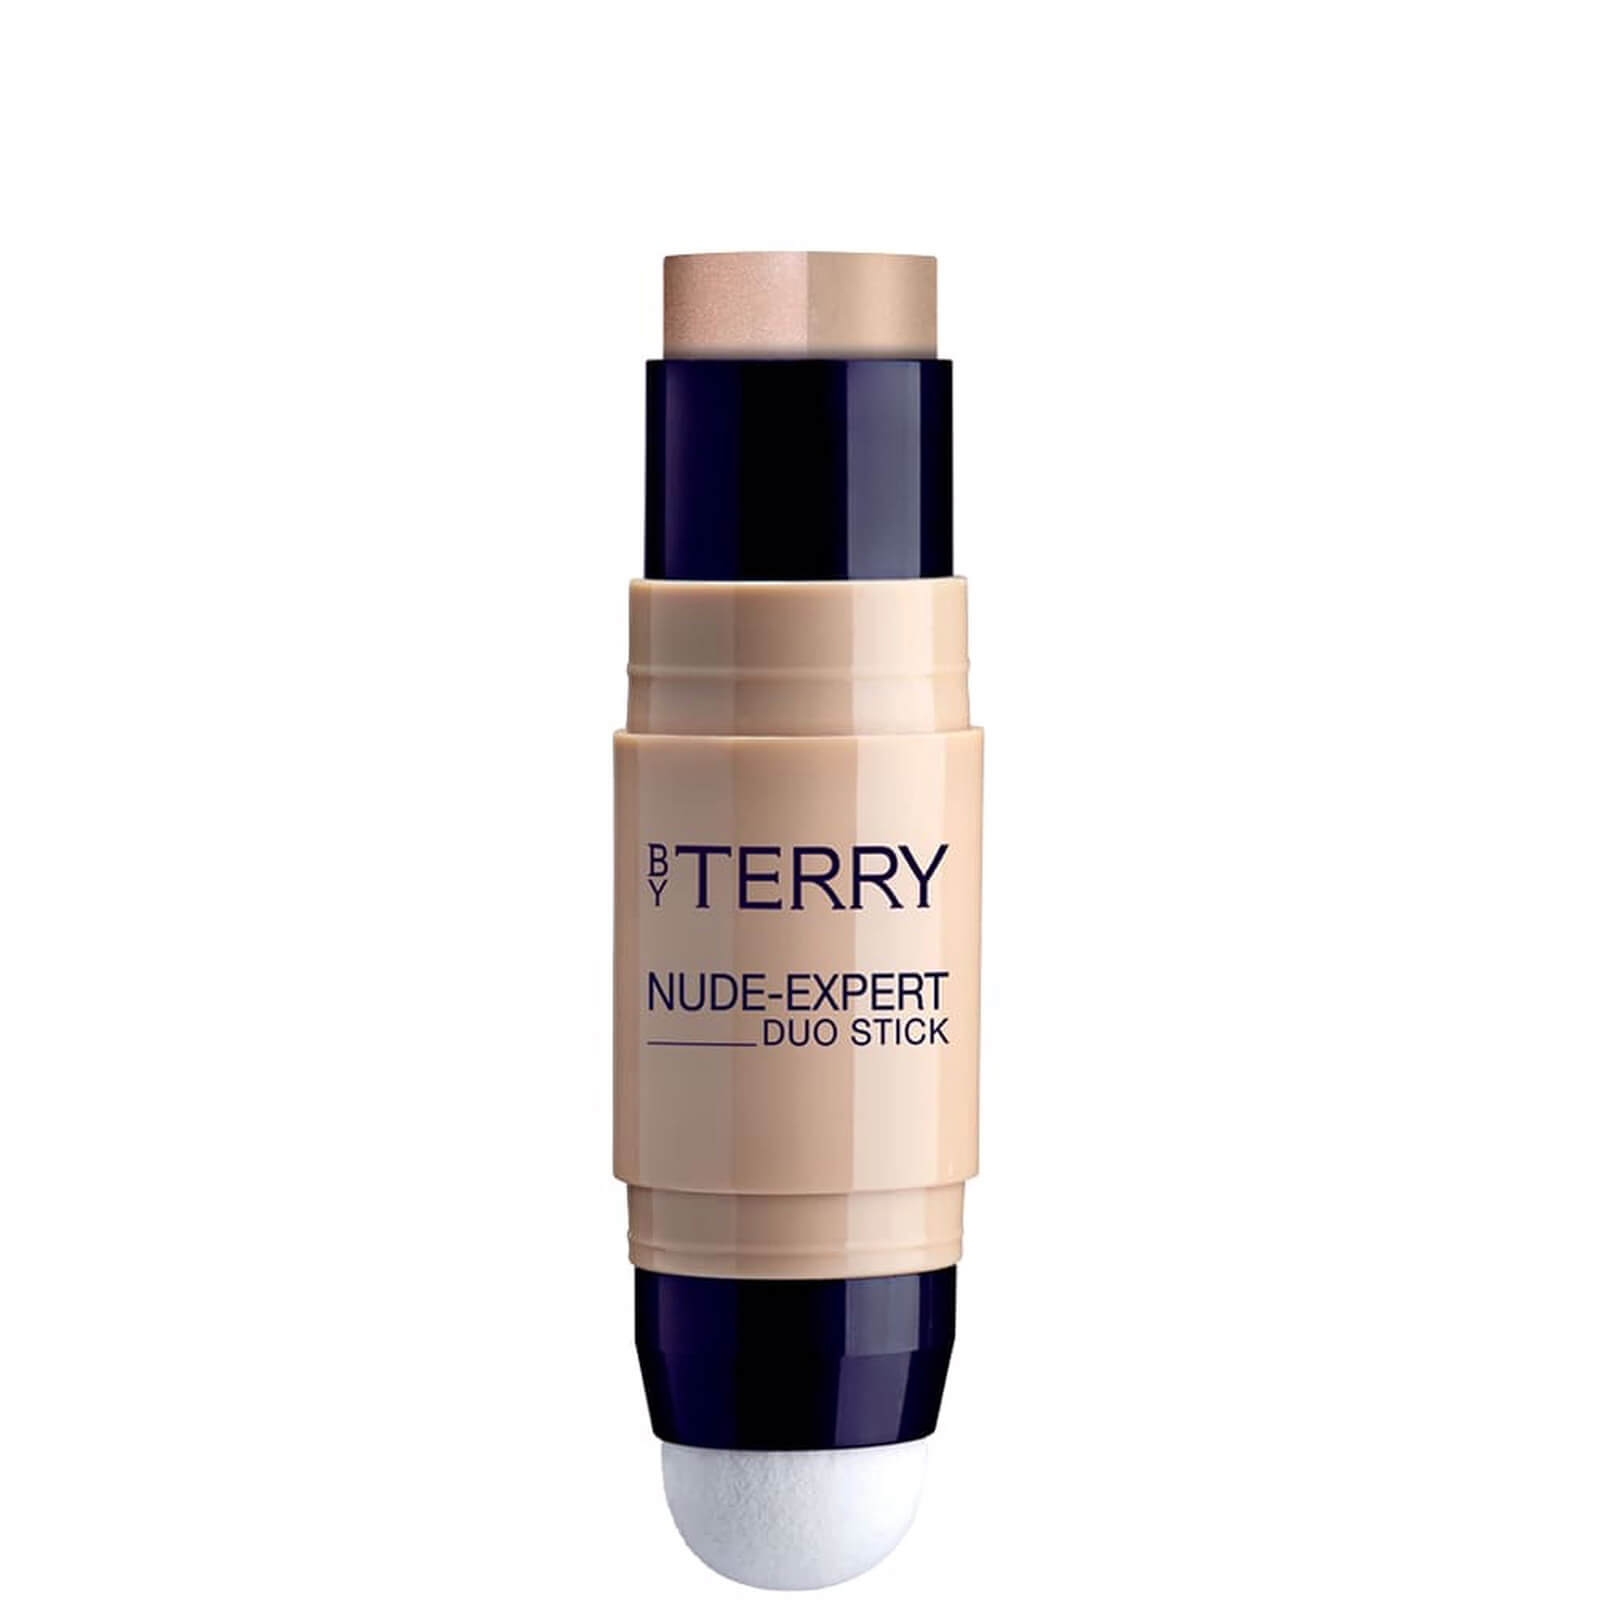 By Terry Nude-Expert Foundation (Various Shades) - 7. Vanilla Beige